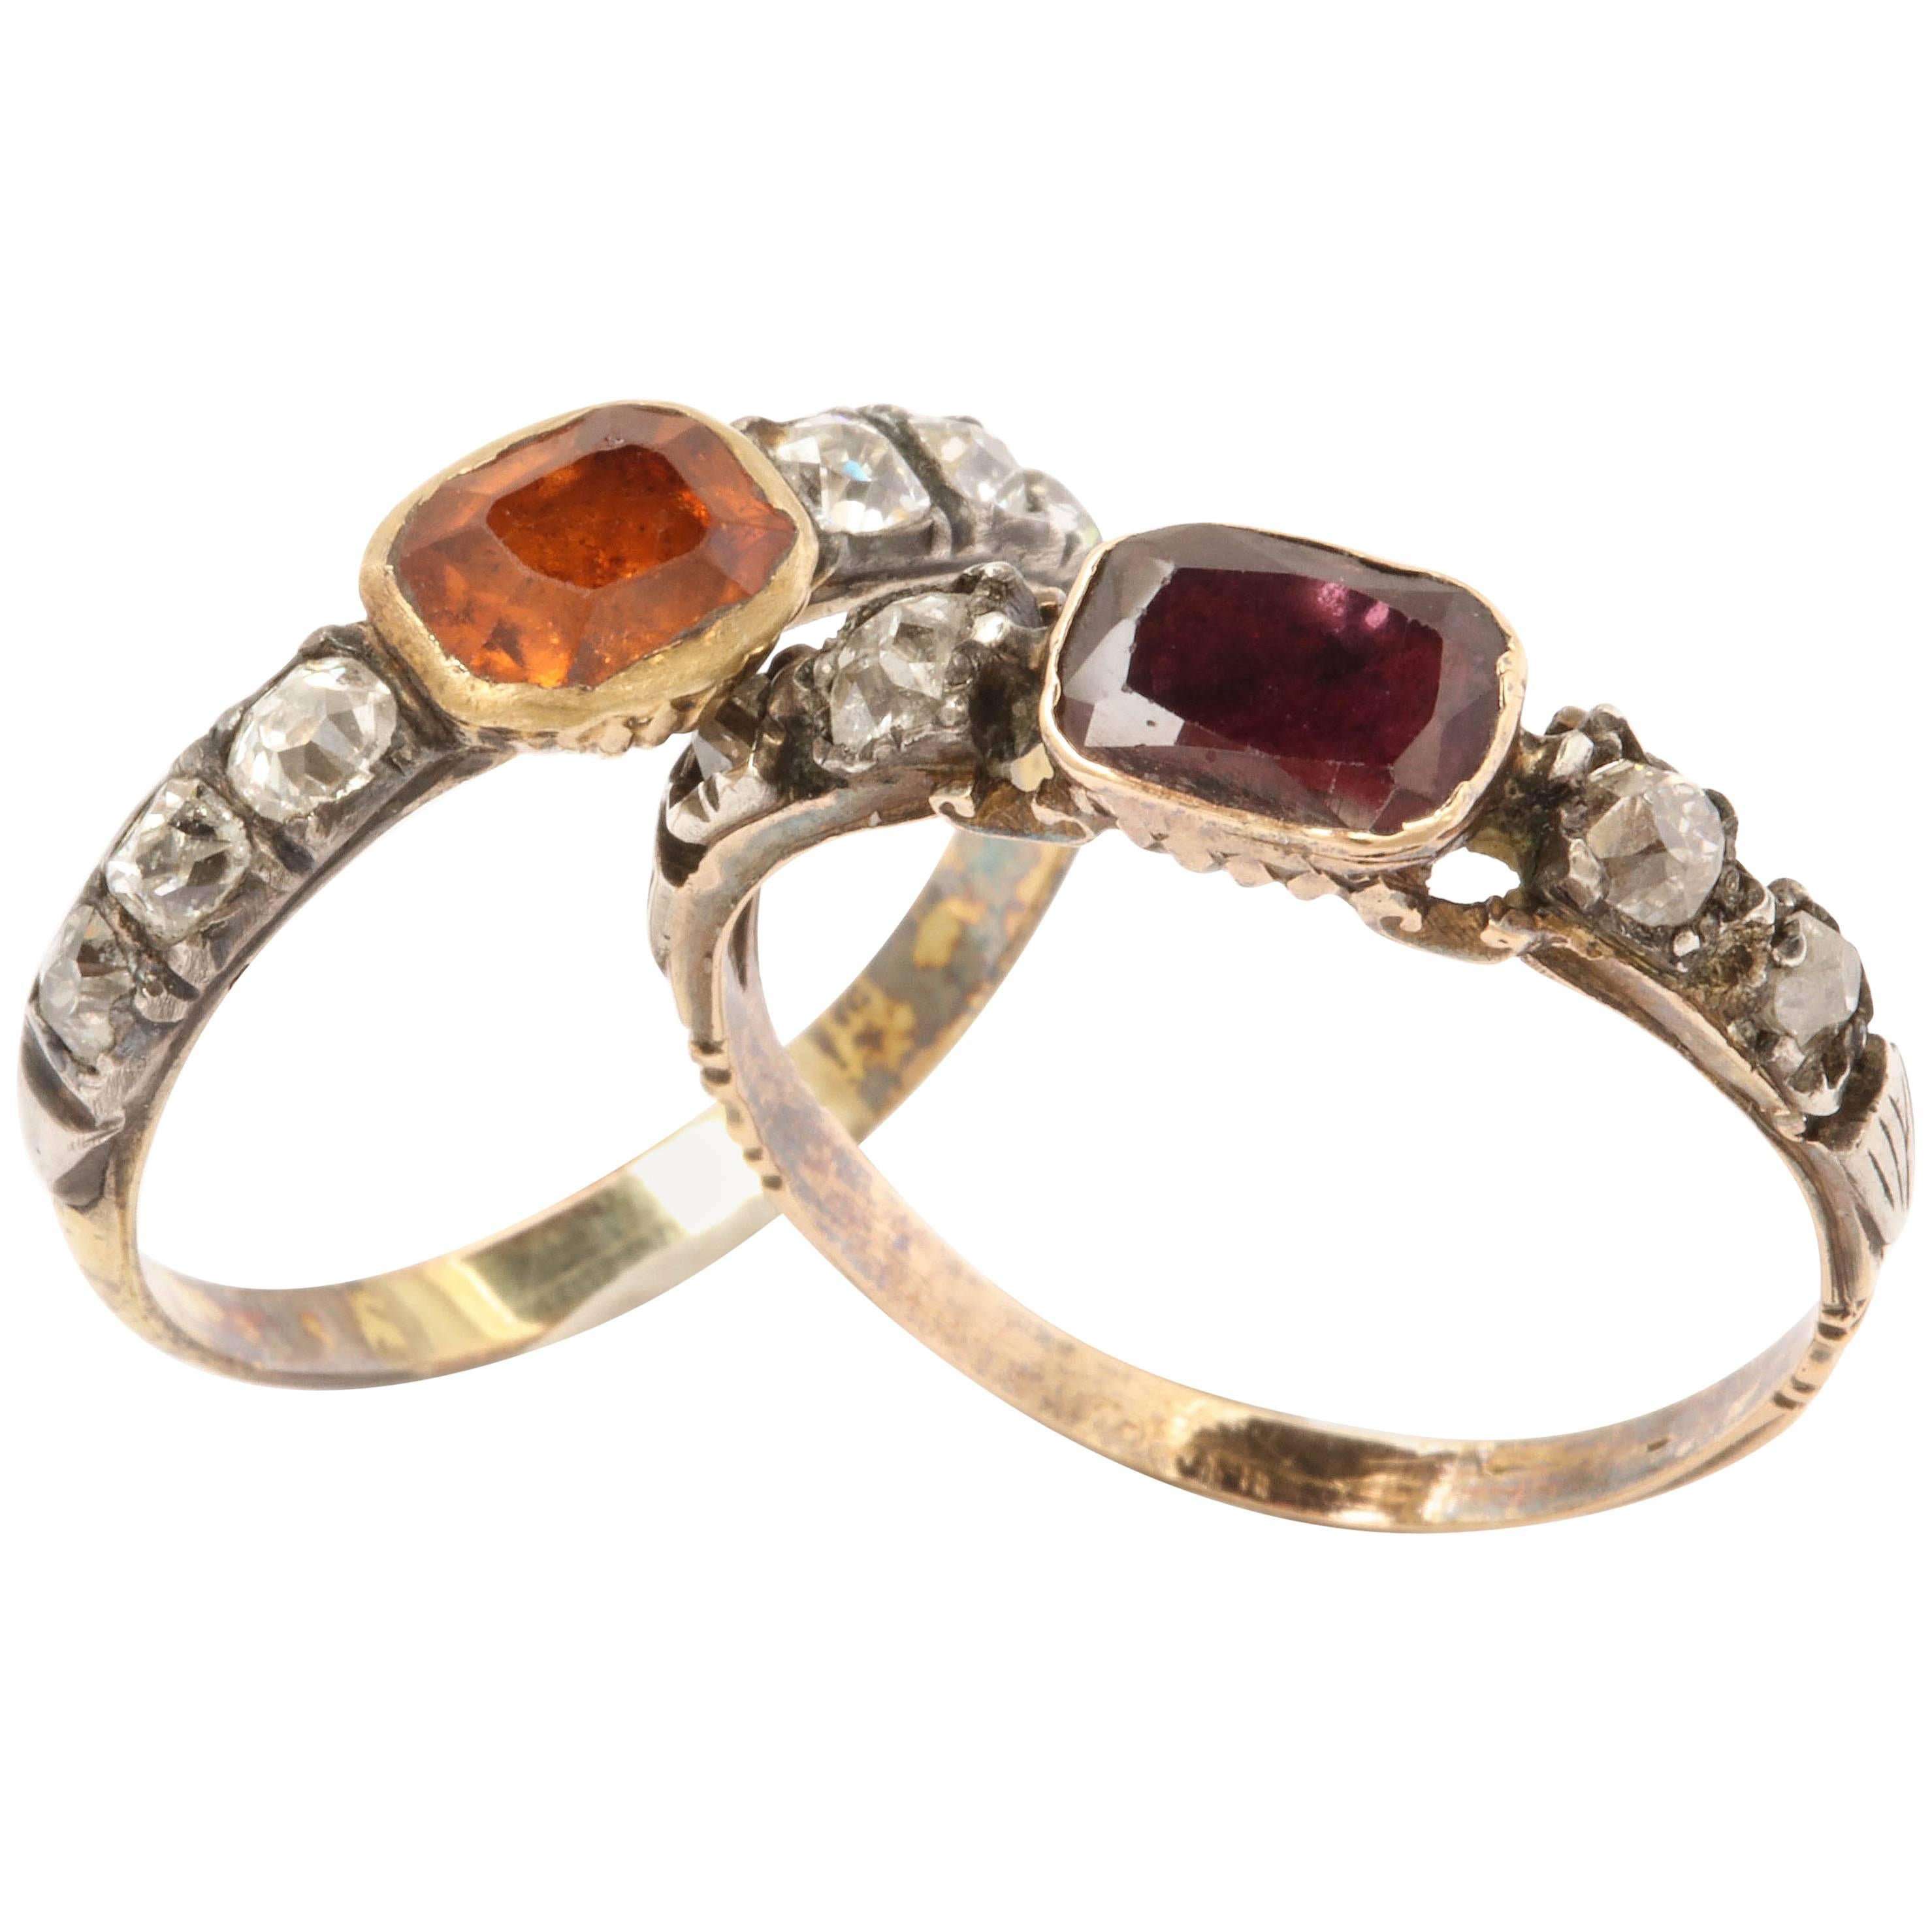 Nearly Matched Pair of Georgian Gemstone and Diamond Rings